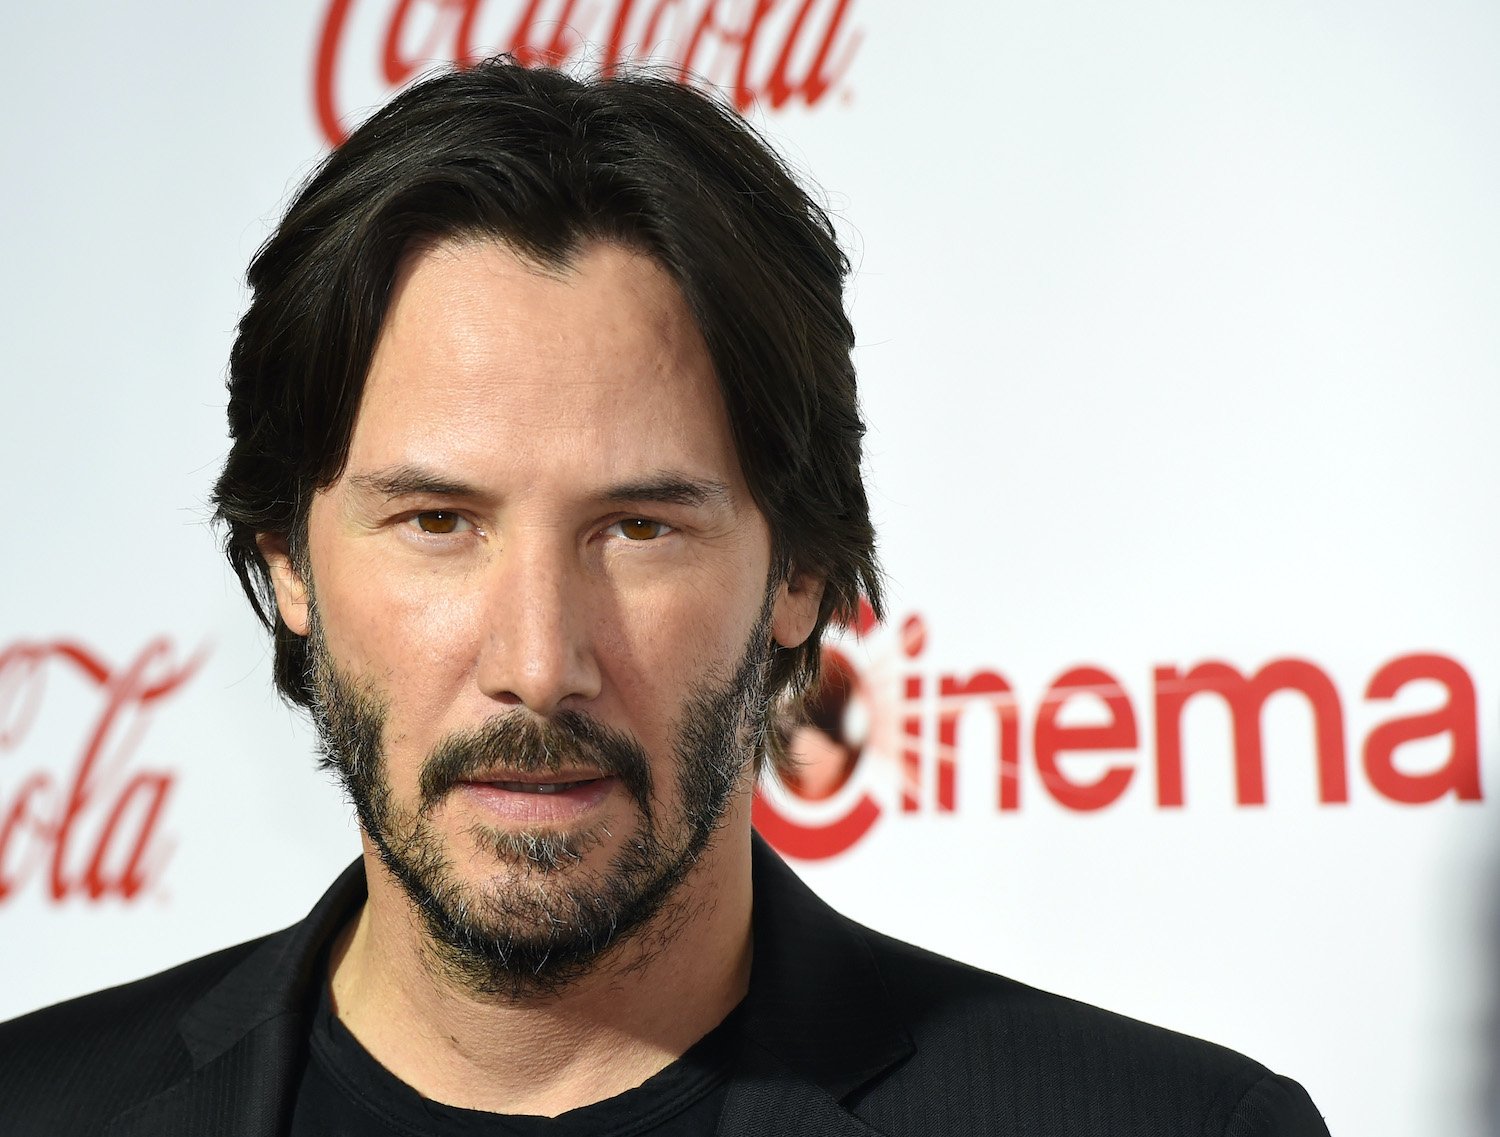 Keanu Reeves attends the CinemaCon Big Screen Achievement Awards in 2016 